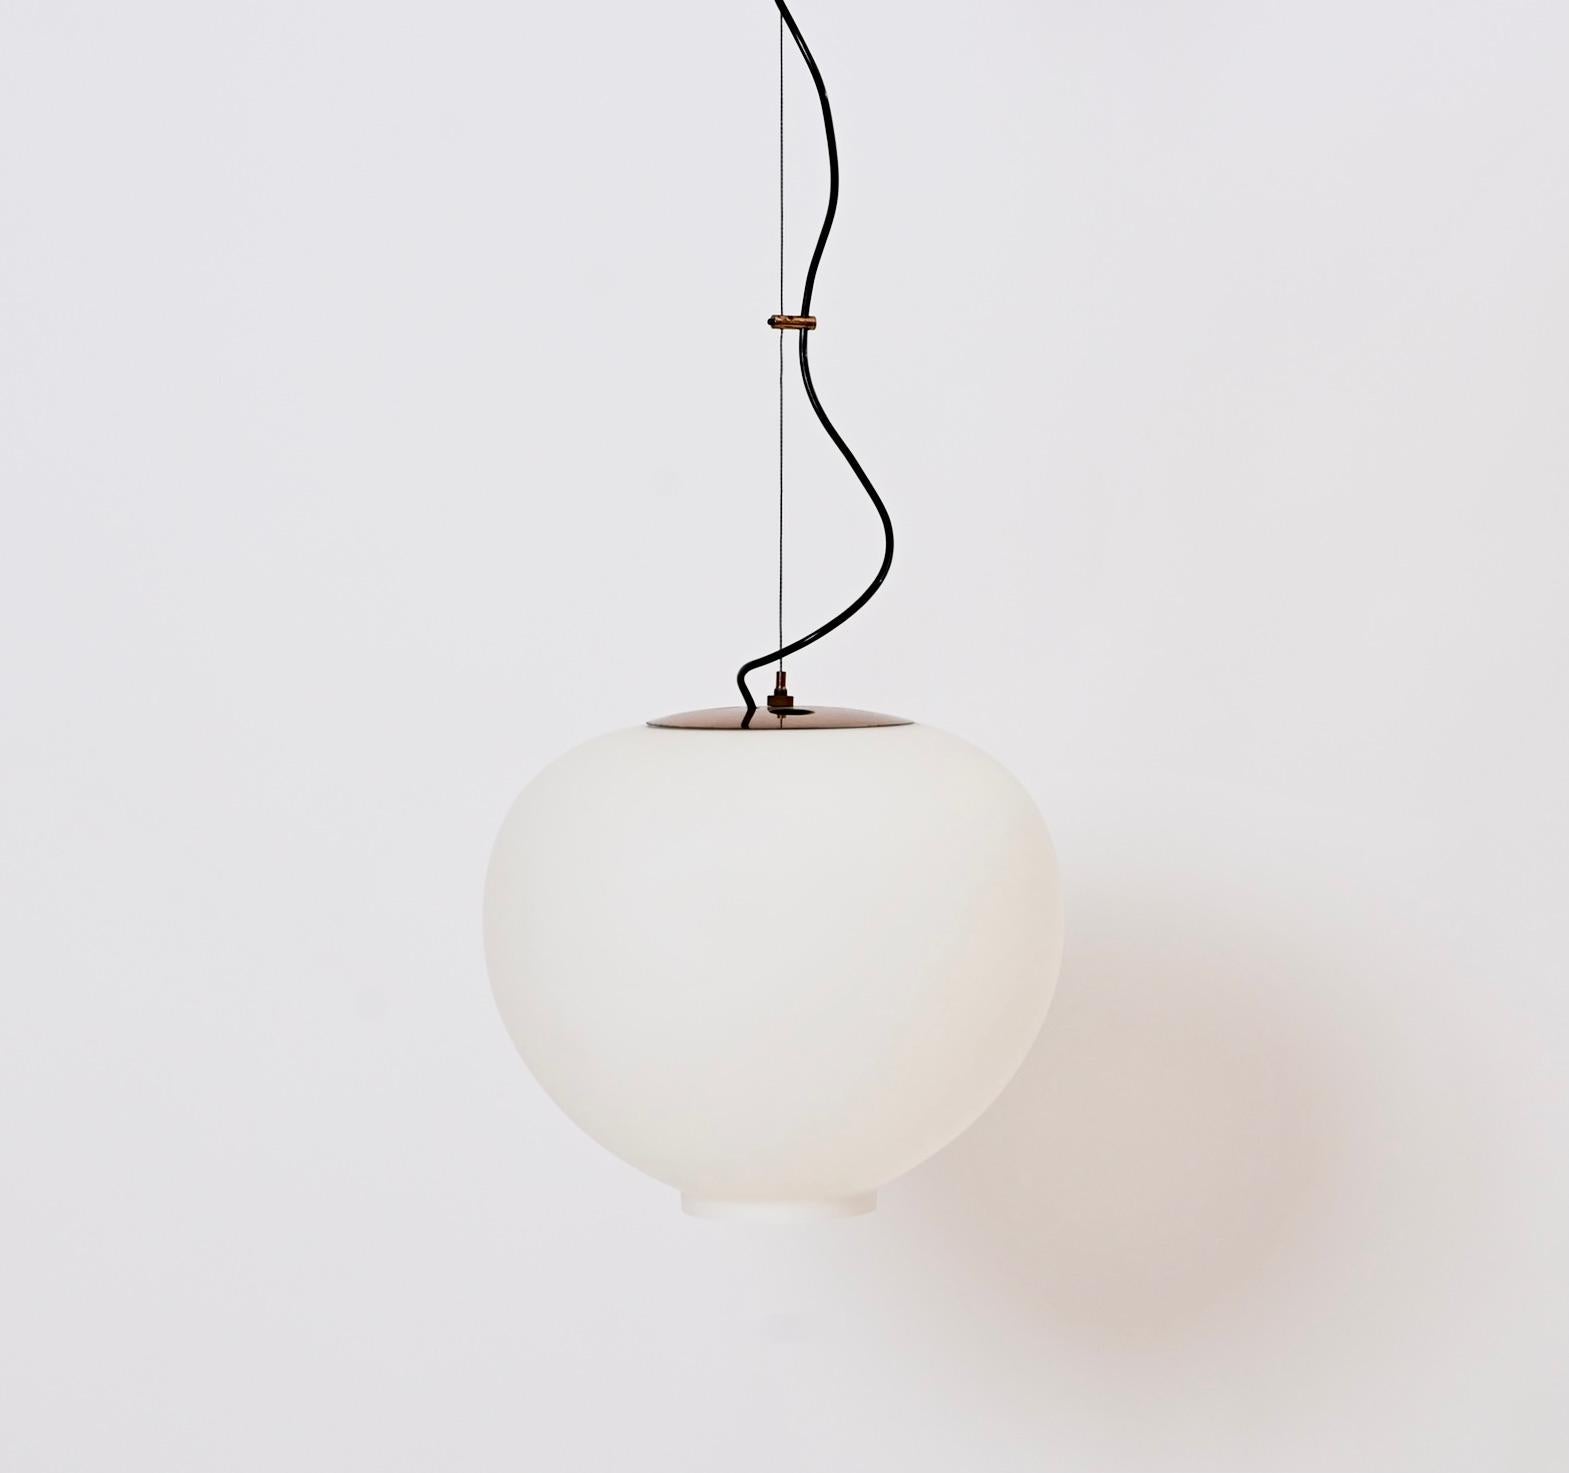 Mid-20th Century Wire-Suspended Opaline Glass Ceiling Pendant by Stilnovo, Italy, circa 1955